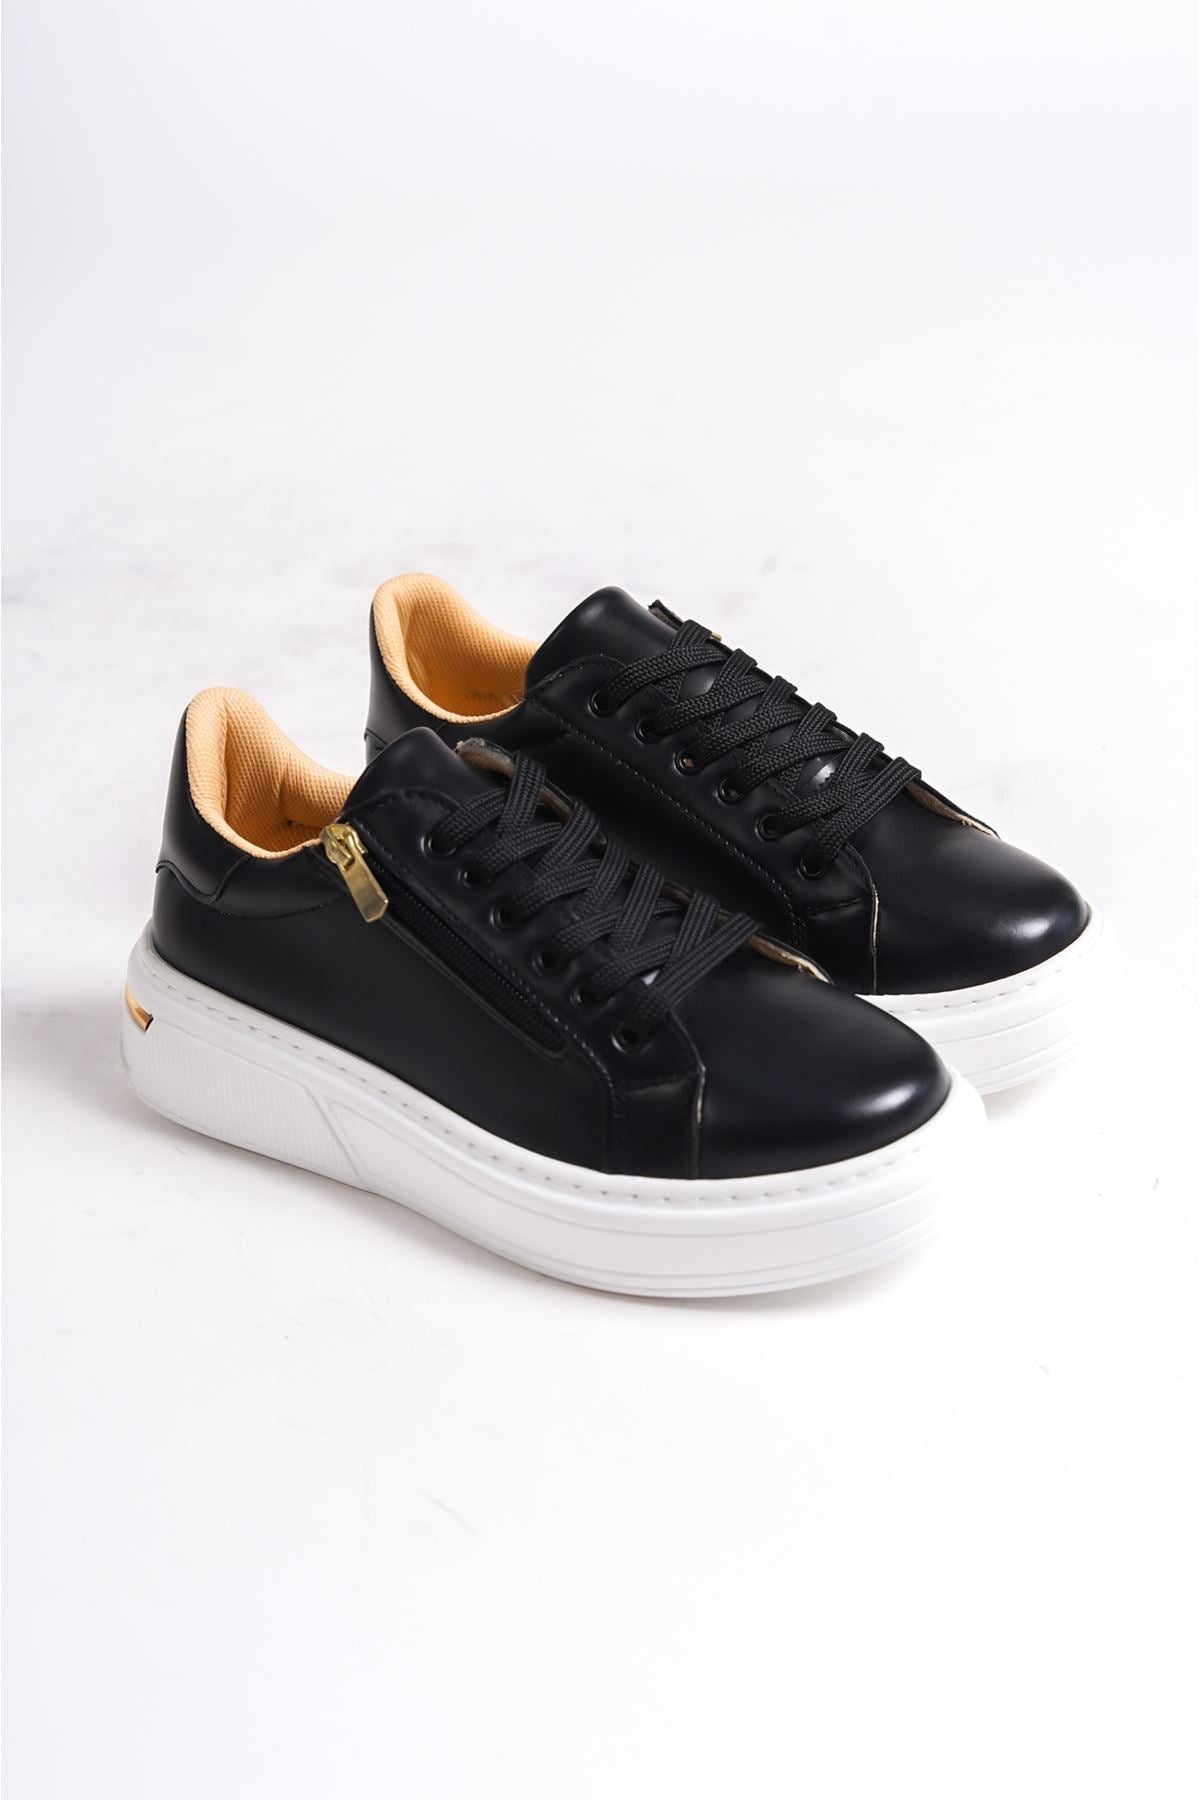 Lace-up Black Women's Sports Shoes - STREETMODE™